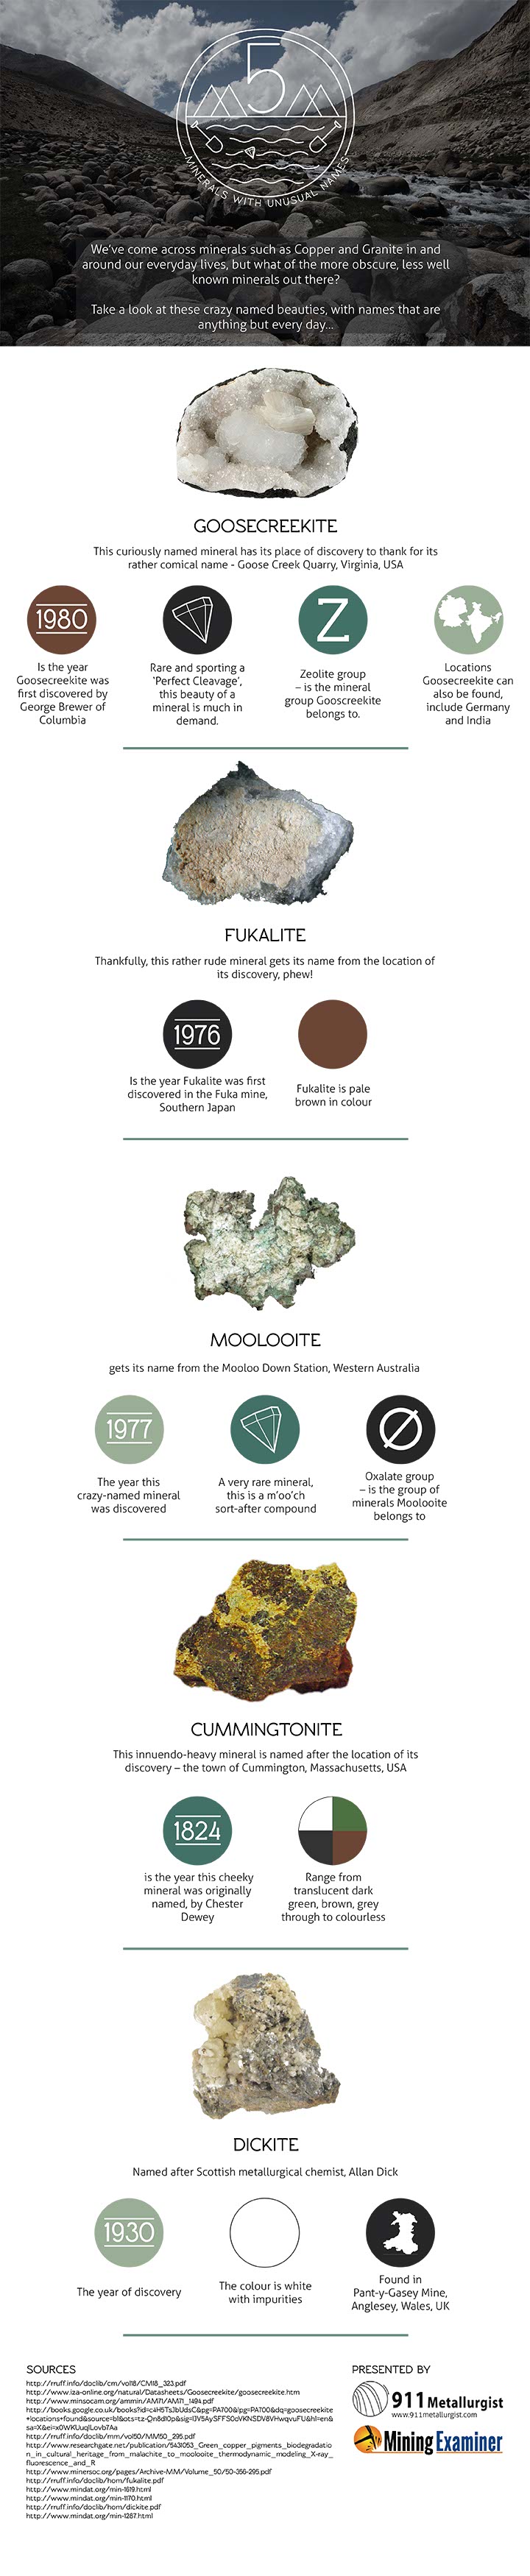 5 Unknown Minerals - iNFOGRAPHiCs MANiA